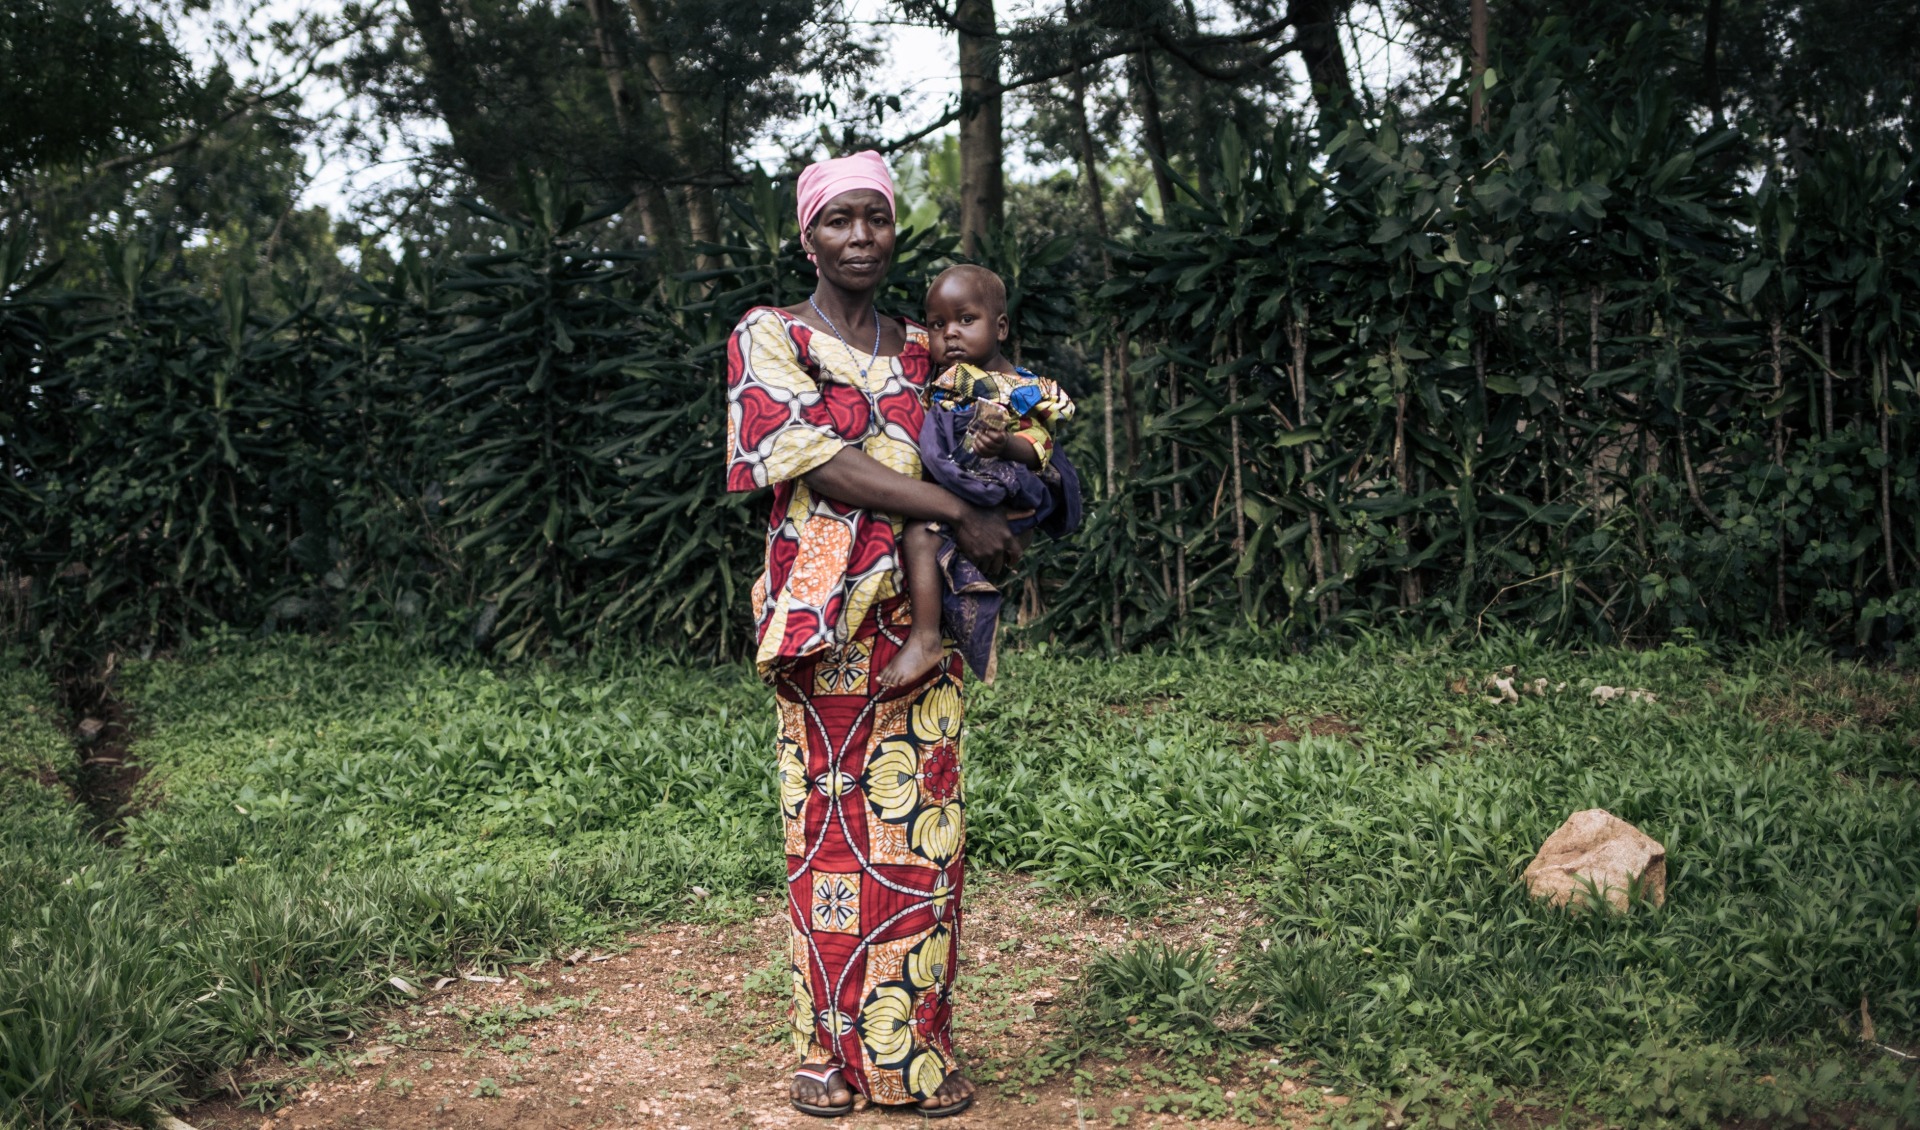 Georgine Dz'dha Nzale holds her 27-month-old son, David Wauba, who suffers from severe acute malnutrition, near the Drodro Health Center in Ituri, northeastern Democratic Republic of Congo.